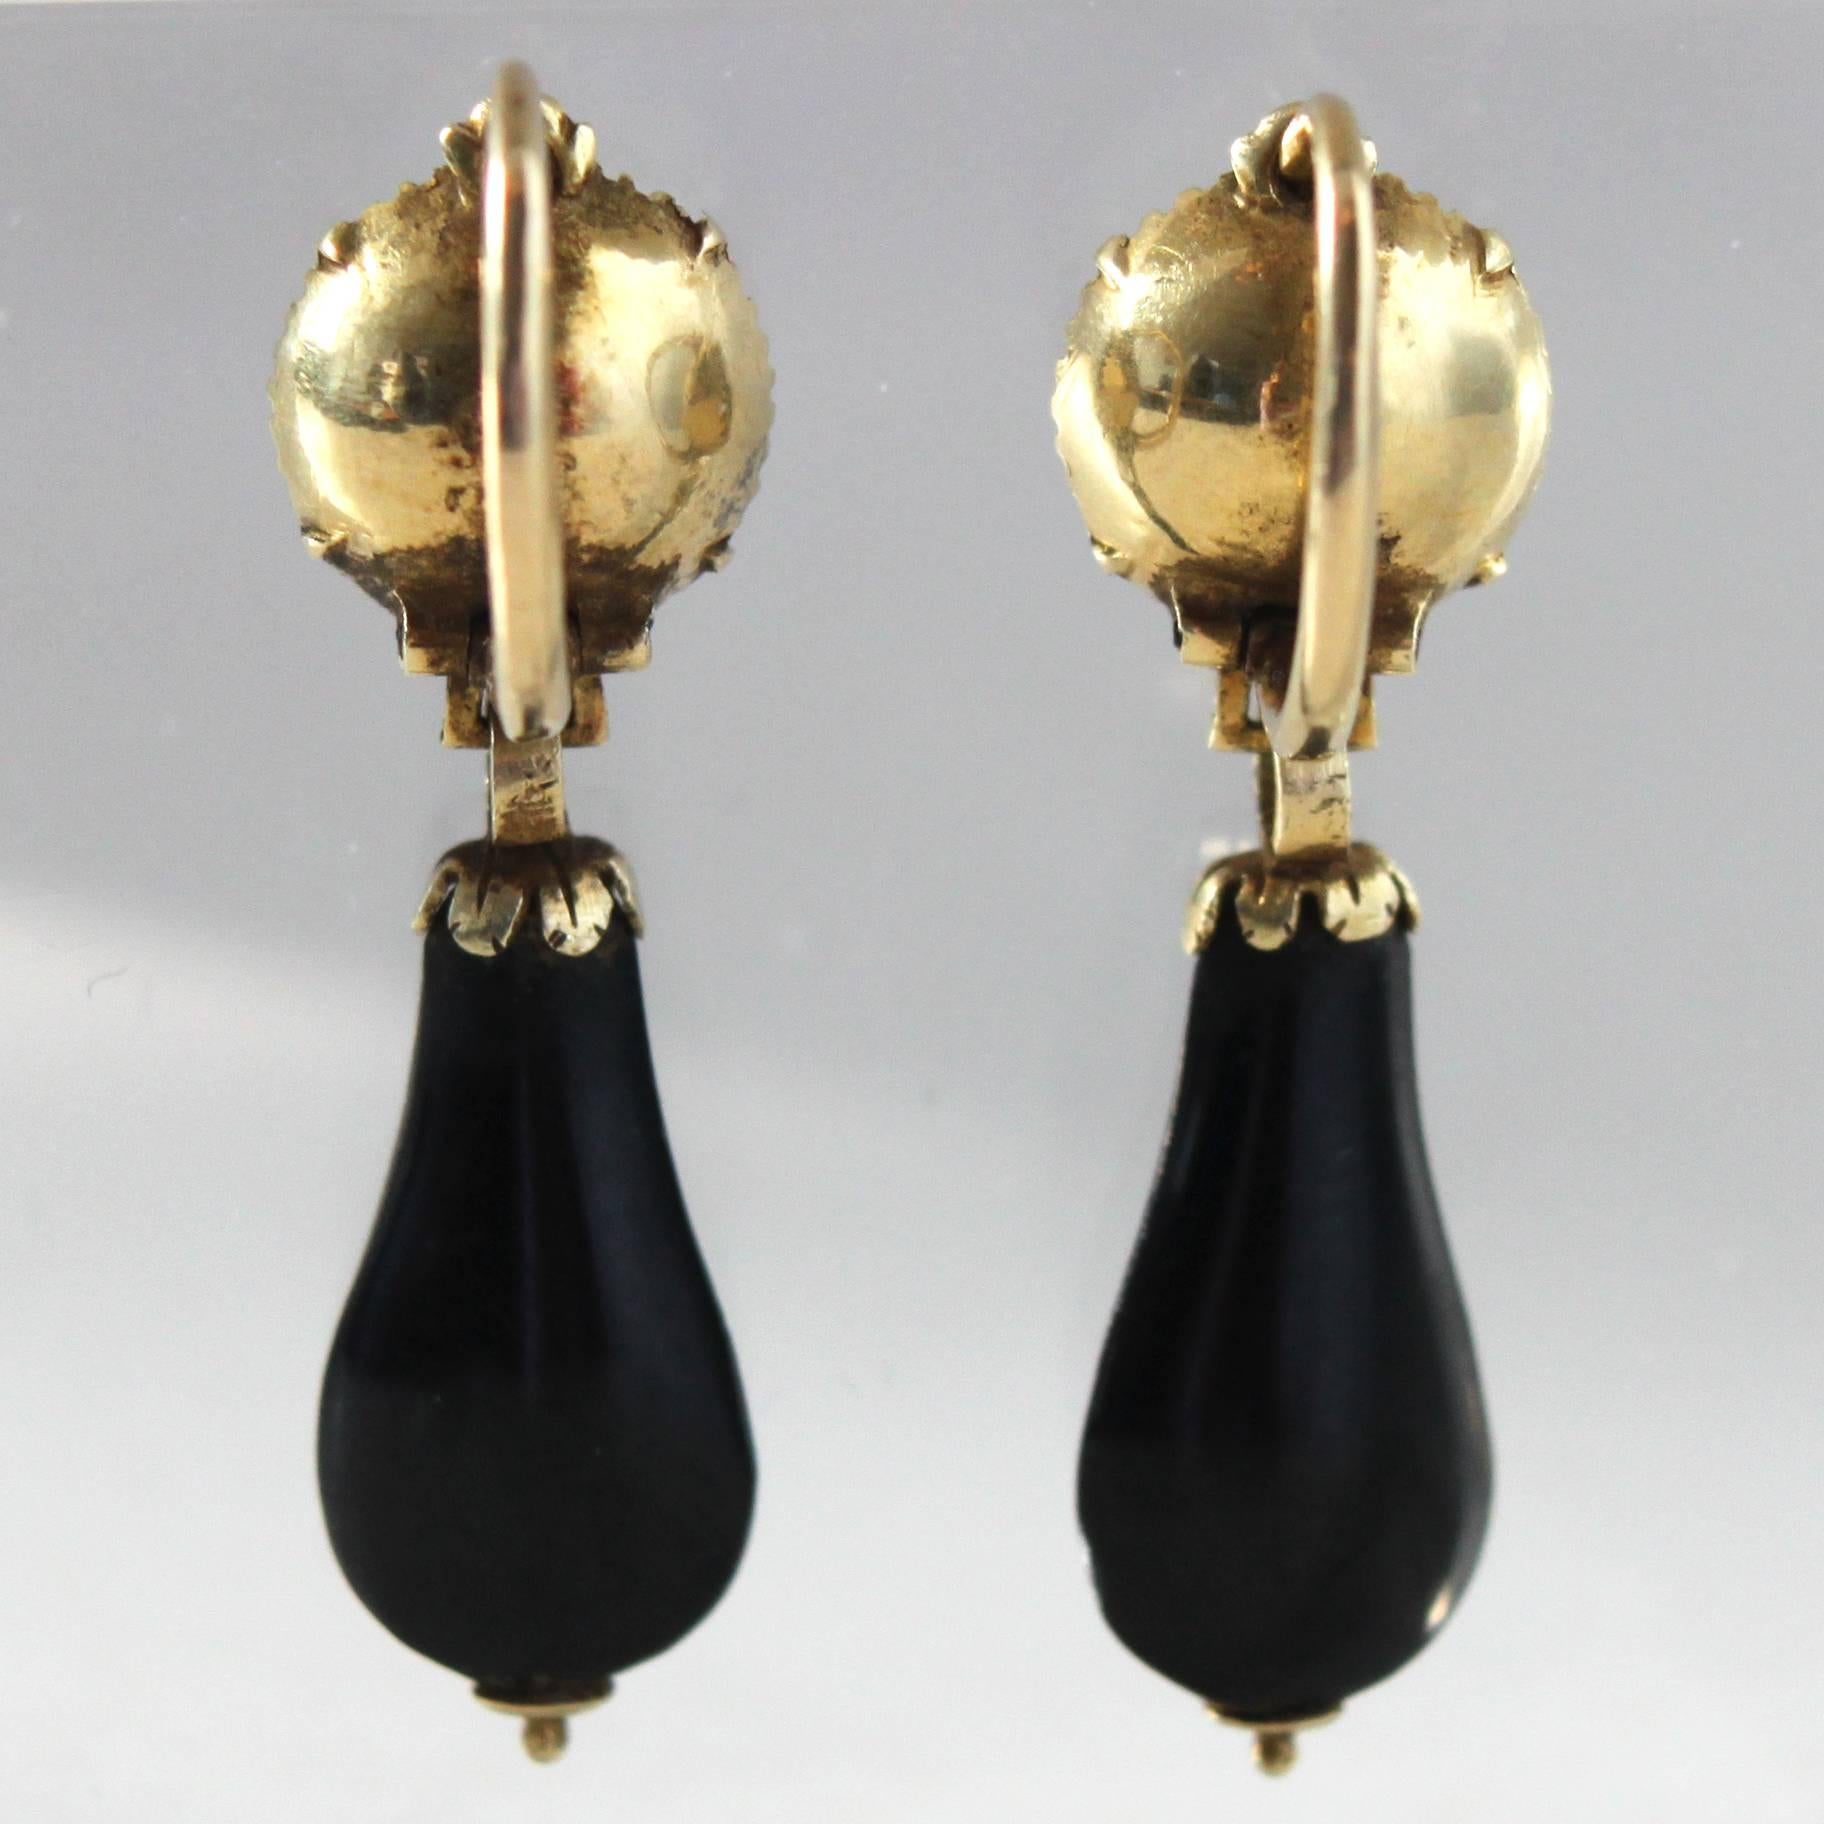 Antique pair of Victorian Onyx Pendant Earrings, ca. 1870s

A sleek pair of black onyx and gold hoop earrings, consisting of two onyx boutons (9mm) and two onyx drilled drops (16x9mm).

The earrings would be perfect for any black/white evening